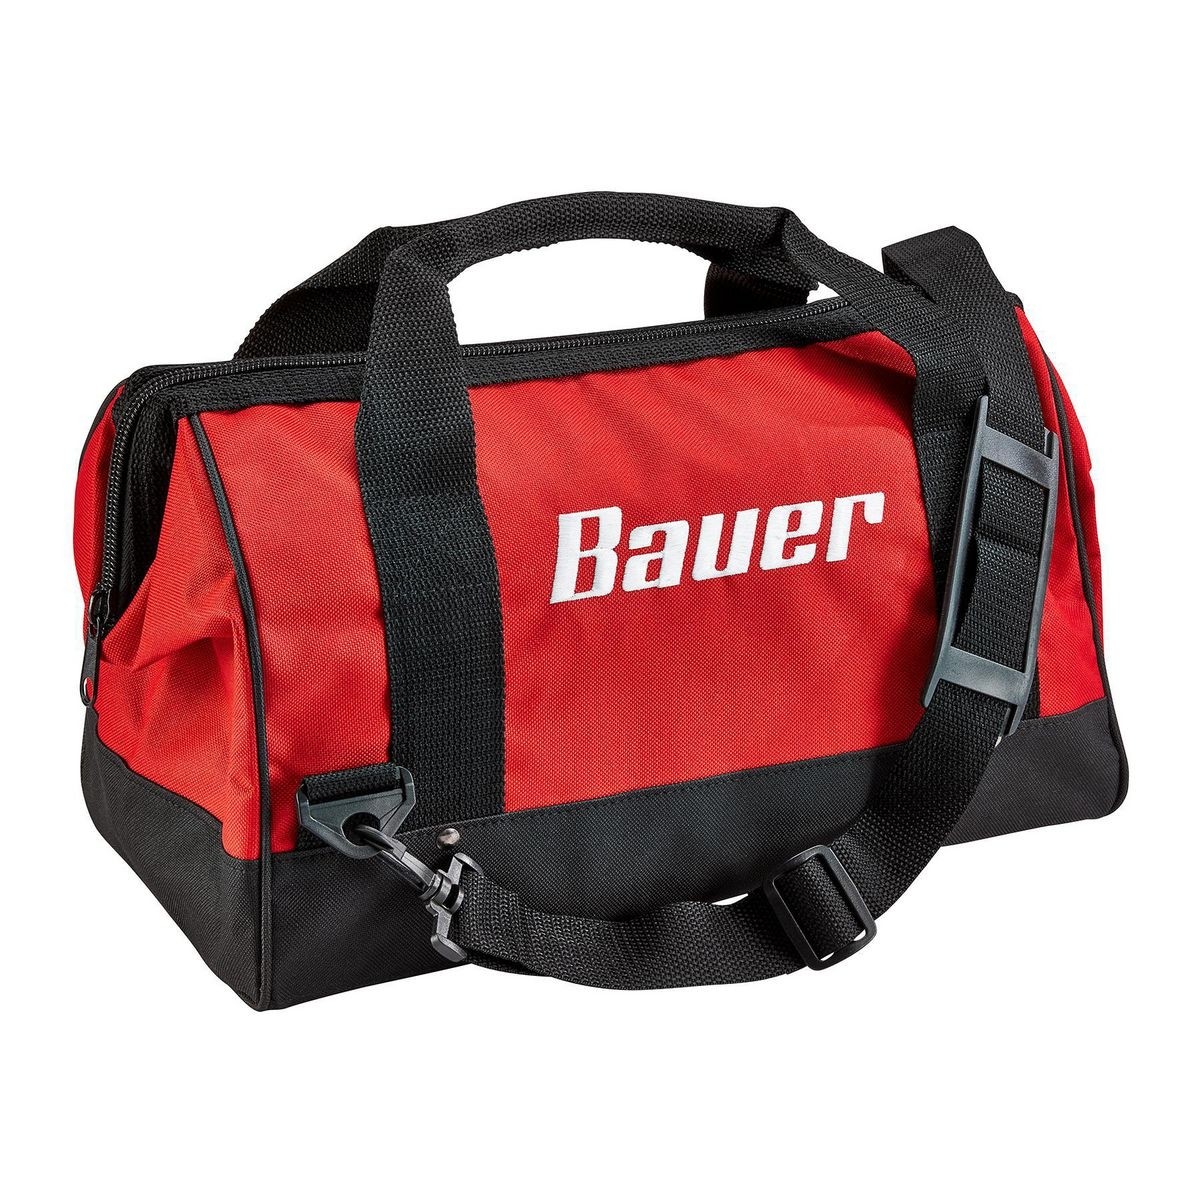 BAUER 16 In. Tool Bag With 6 Pockets - Item 57487